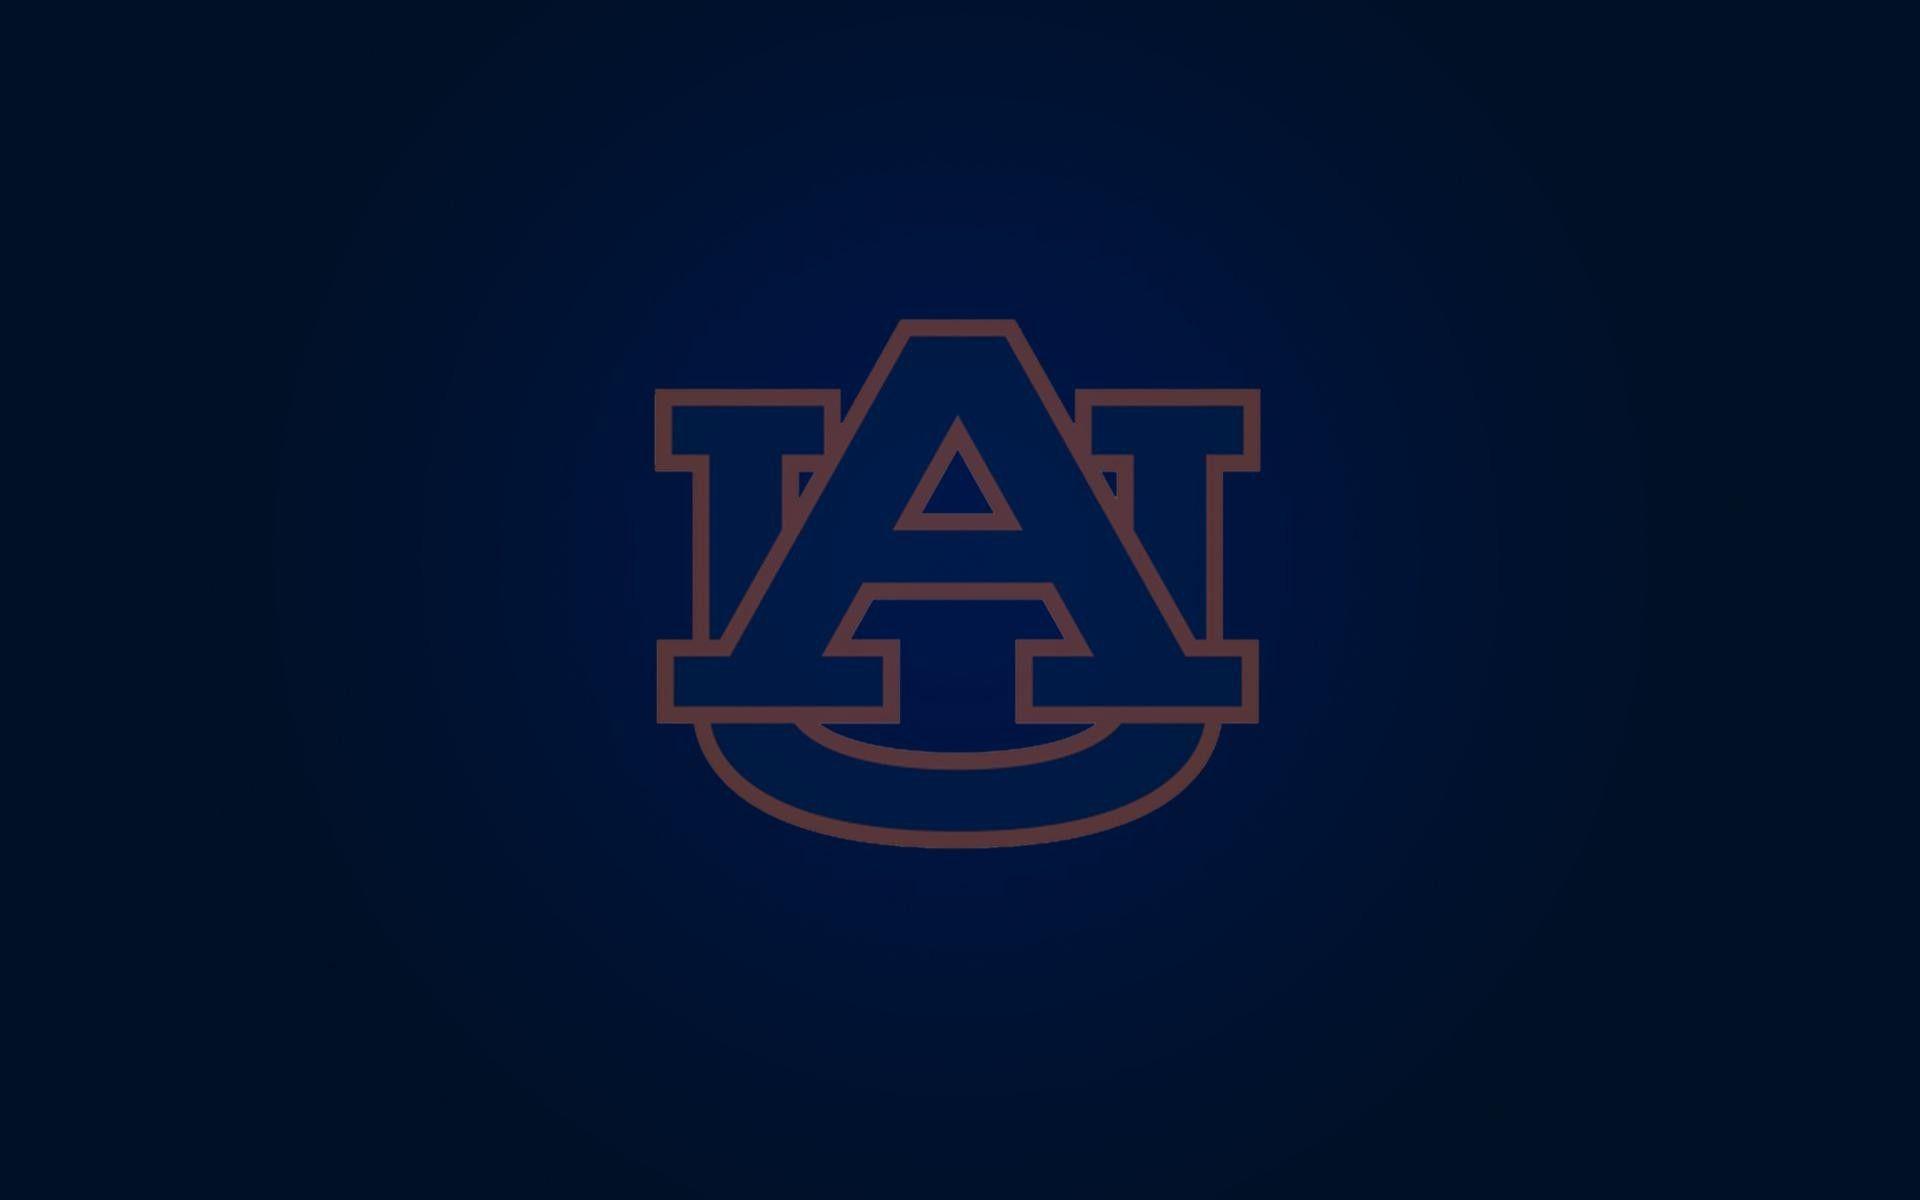 Wallpaper Wednesday is back  Auburn Tigers on 247Sports  Facebook